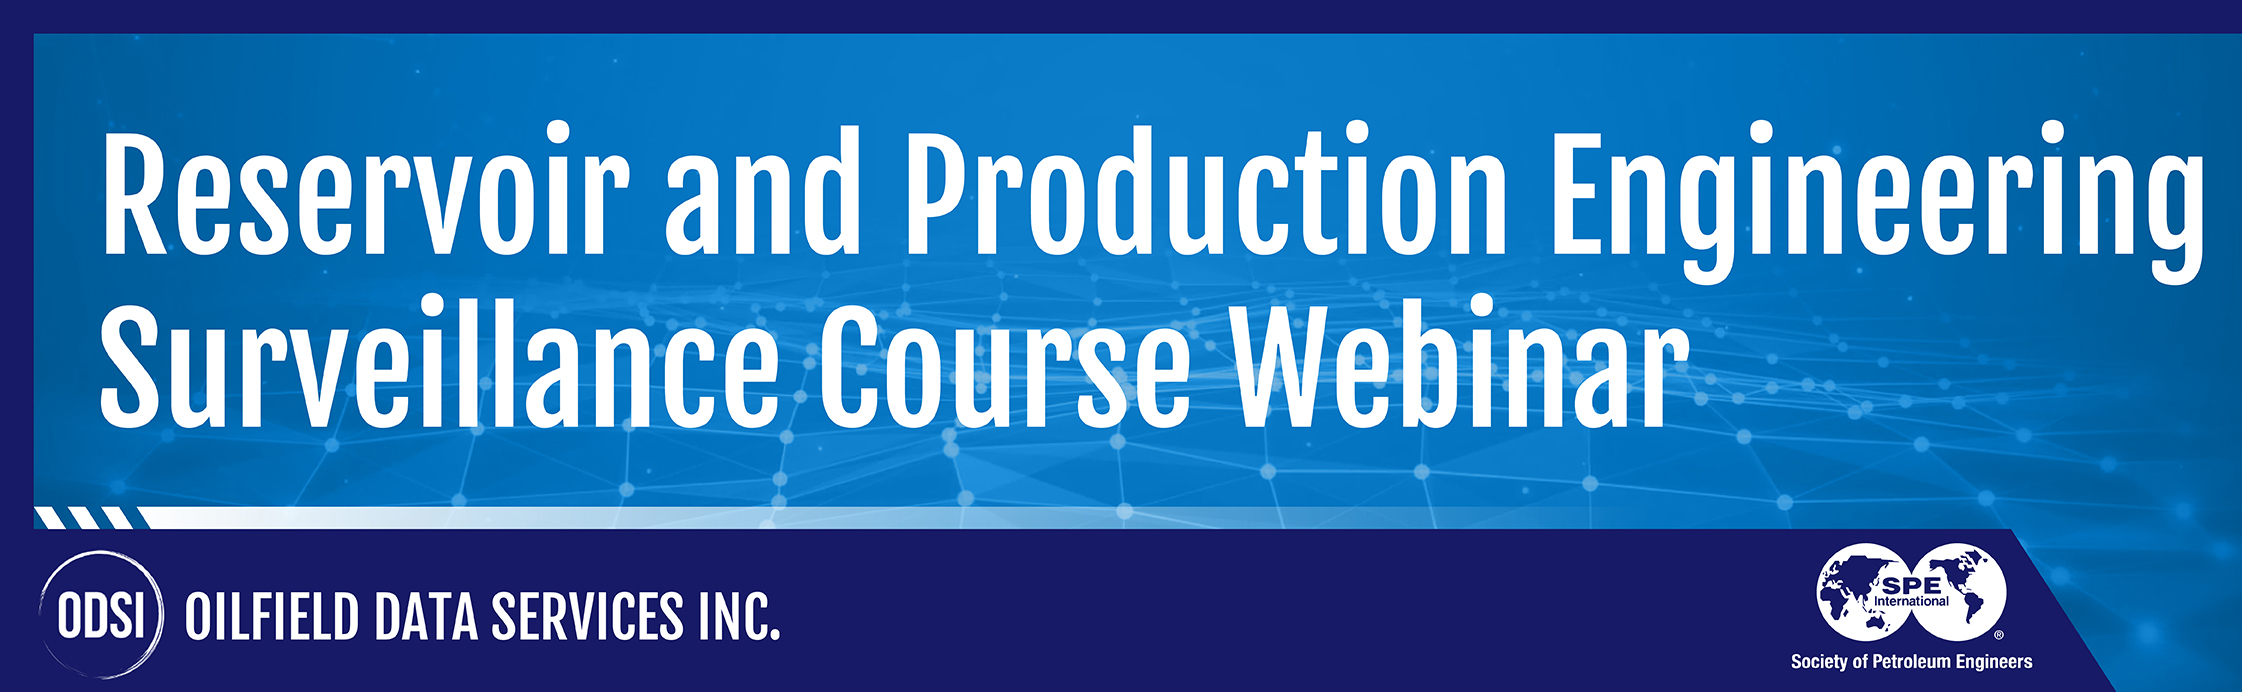 Reservoir and Production Engineering Surveillance Course Webinar